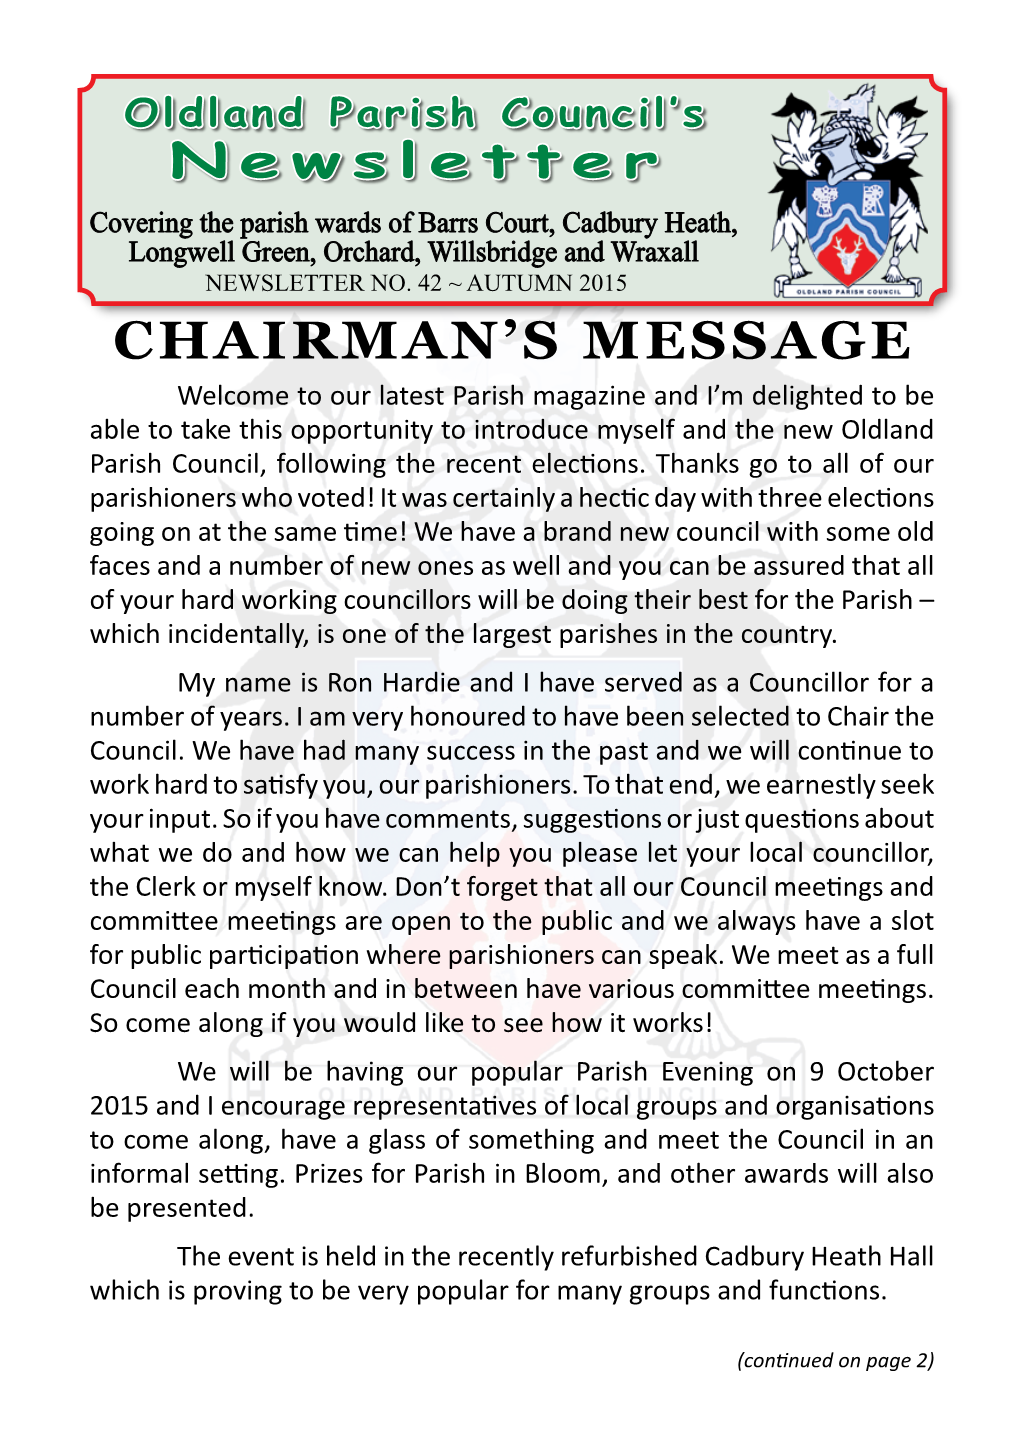 Chairman's Message